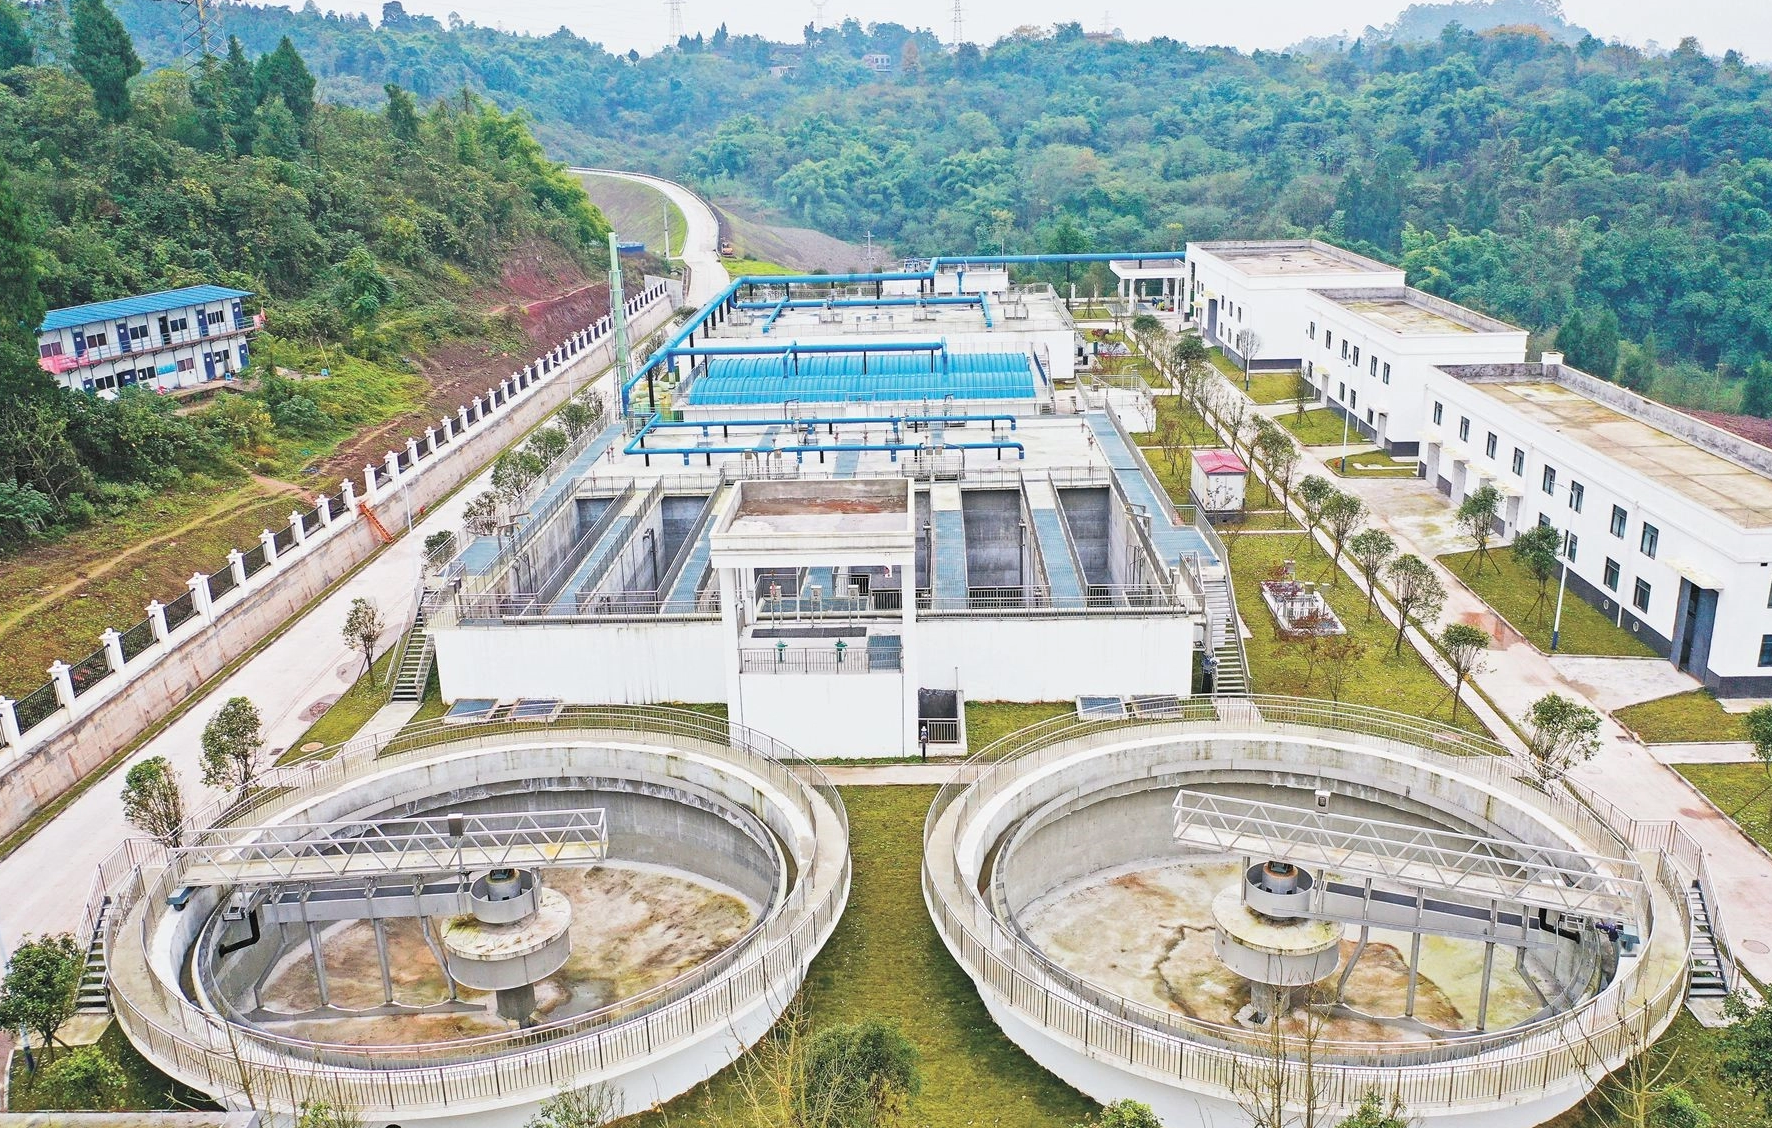 Sewage Treatment Plant of Lingang Urban Industrial Park Online Sewage Water Discharge Water Quality Sensors Monitoring Analysis